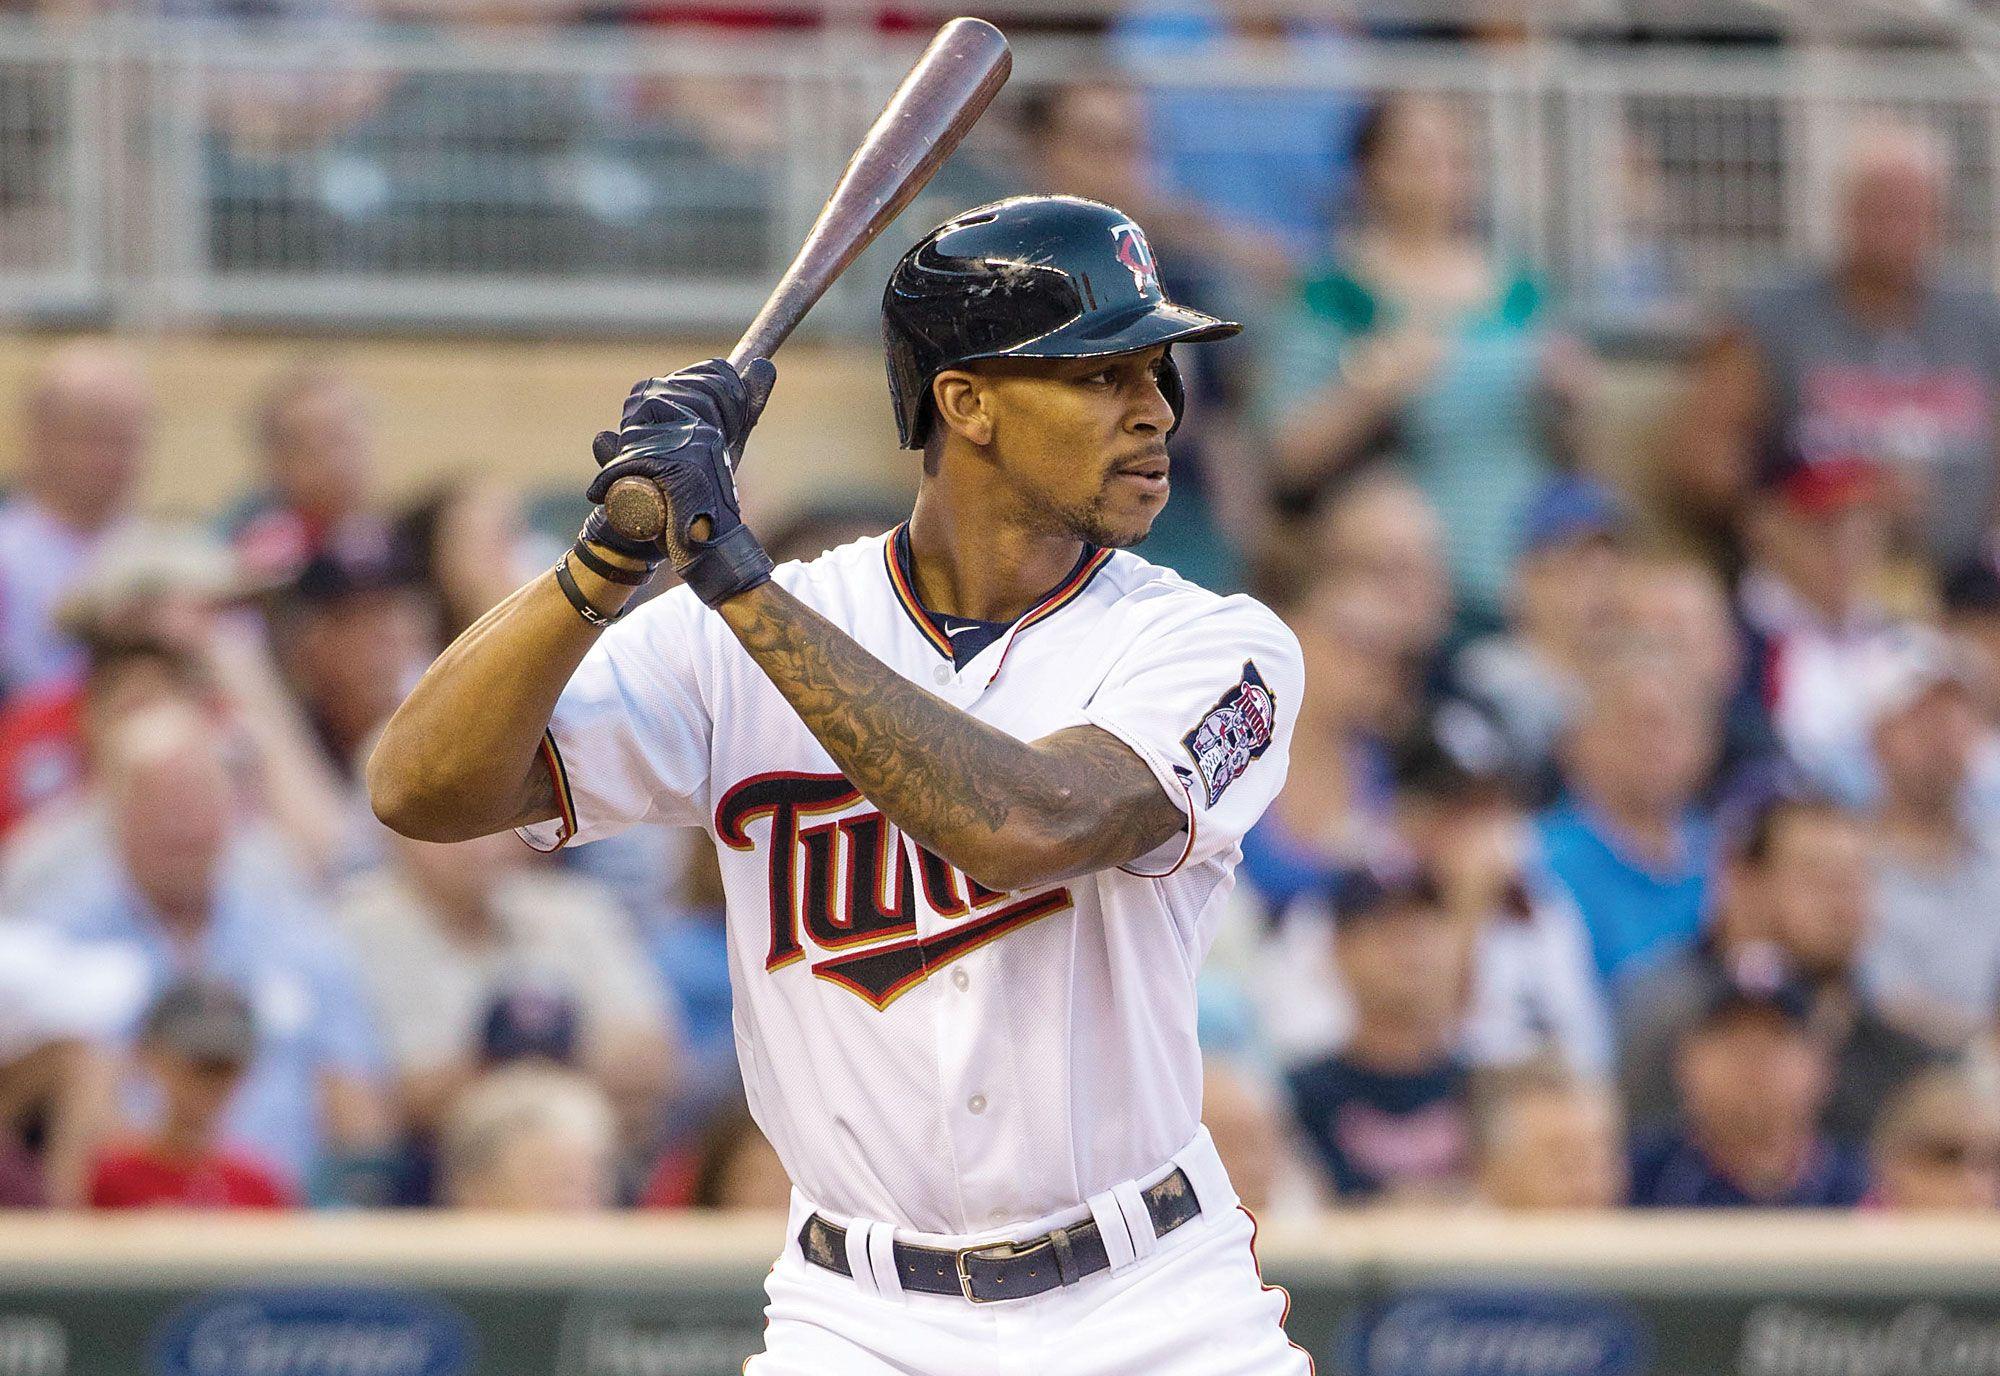 Download Byron Buxton Pointing And Looking Up Wallpaper